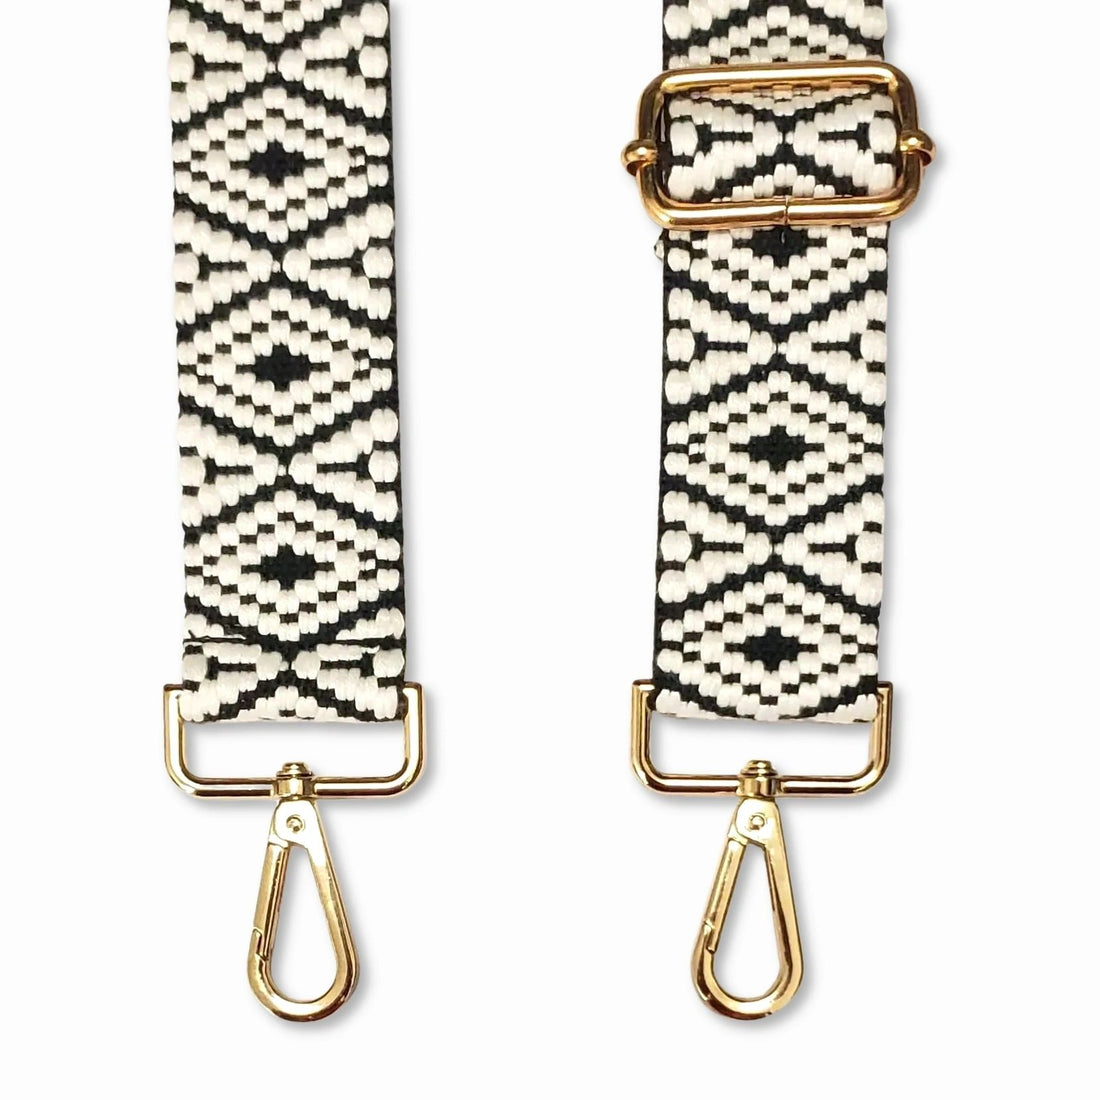 Adjustable black and white aztec printed strap with golden carabiners 